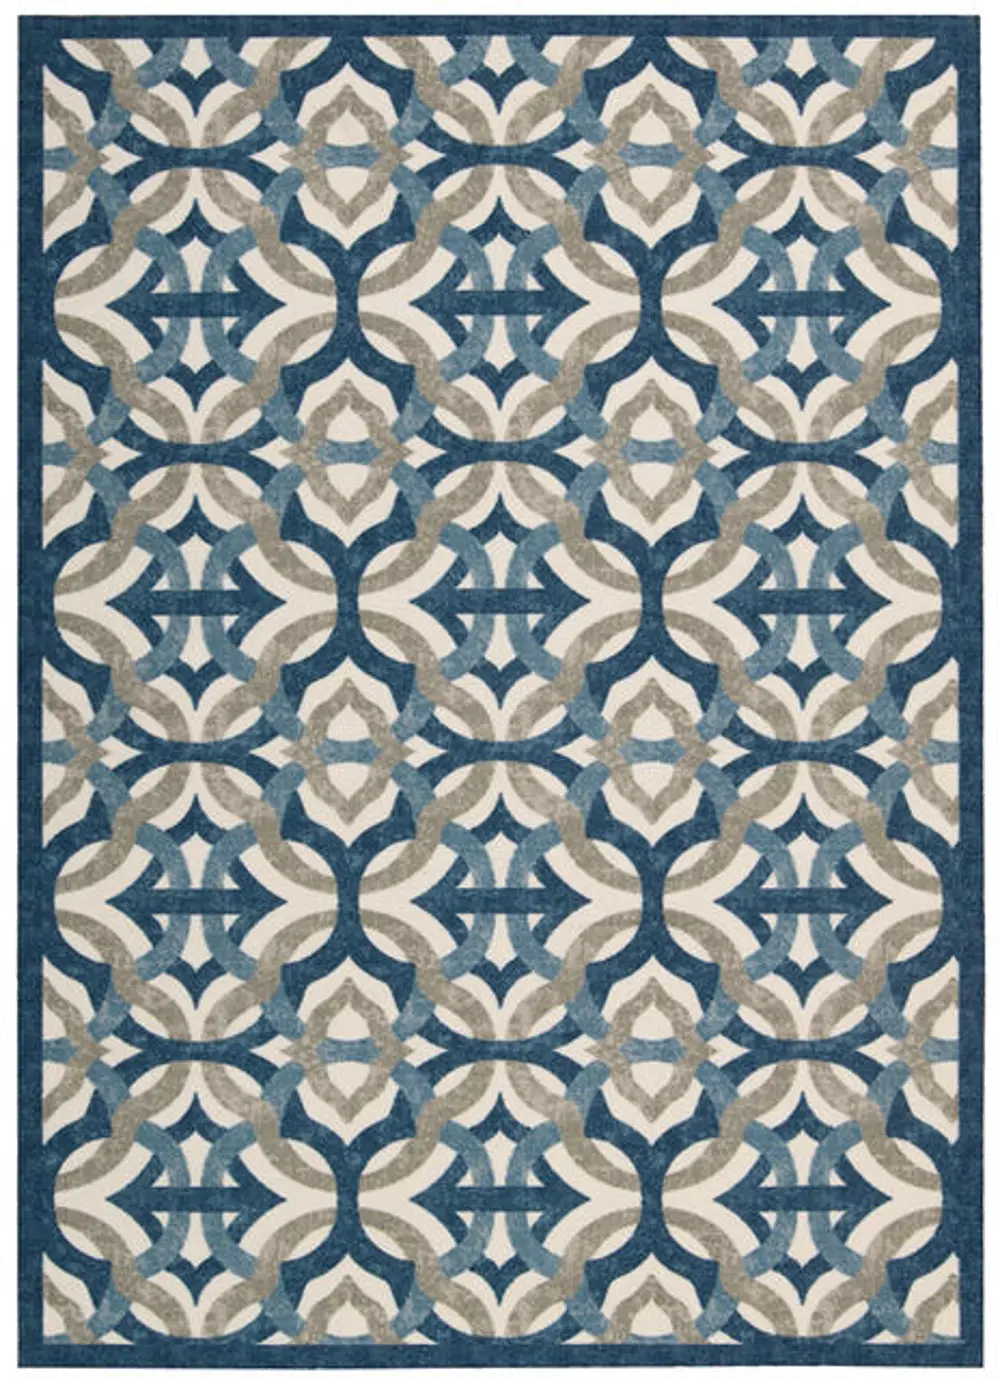 8 x 11 Large Blue, Taupe, and Cream Indoor-Outdoor Rug - Waverly Sun' Shade-1